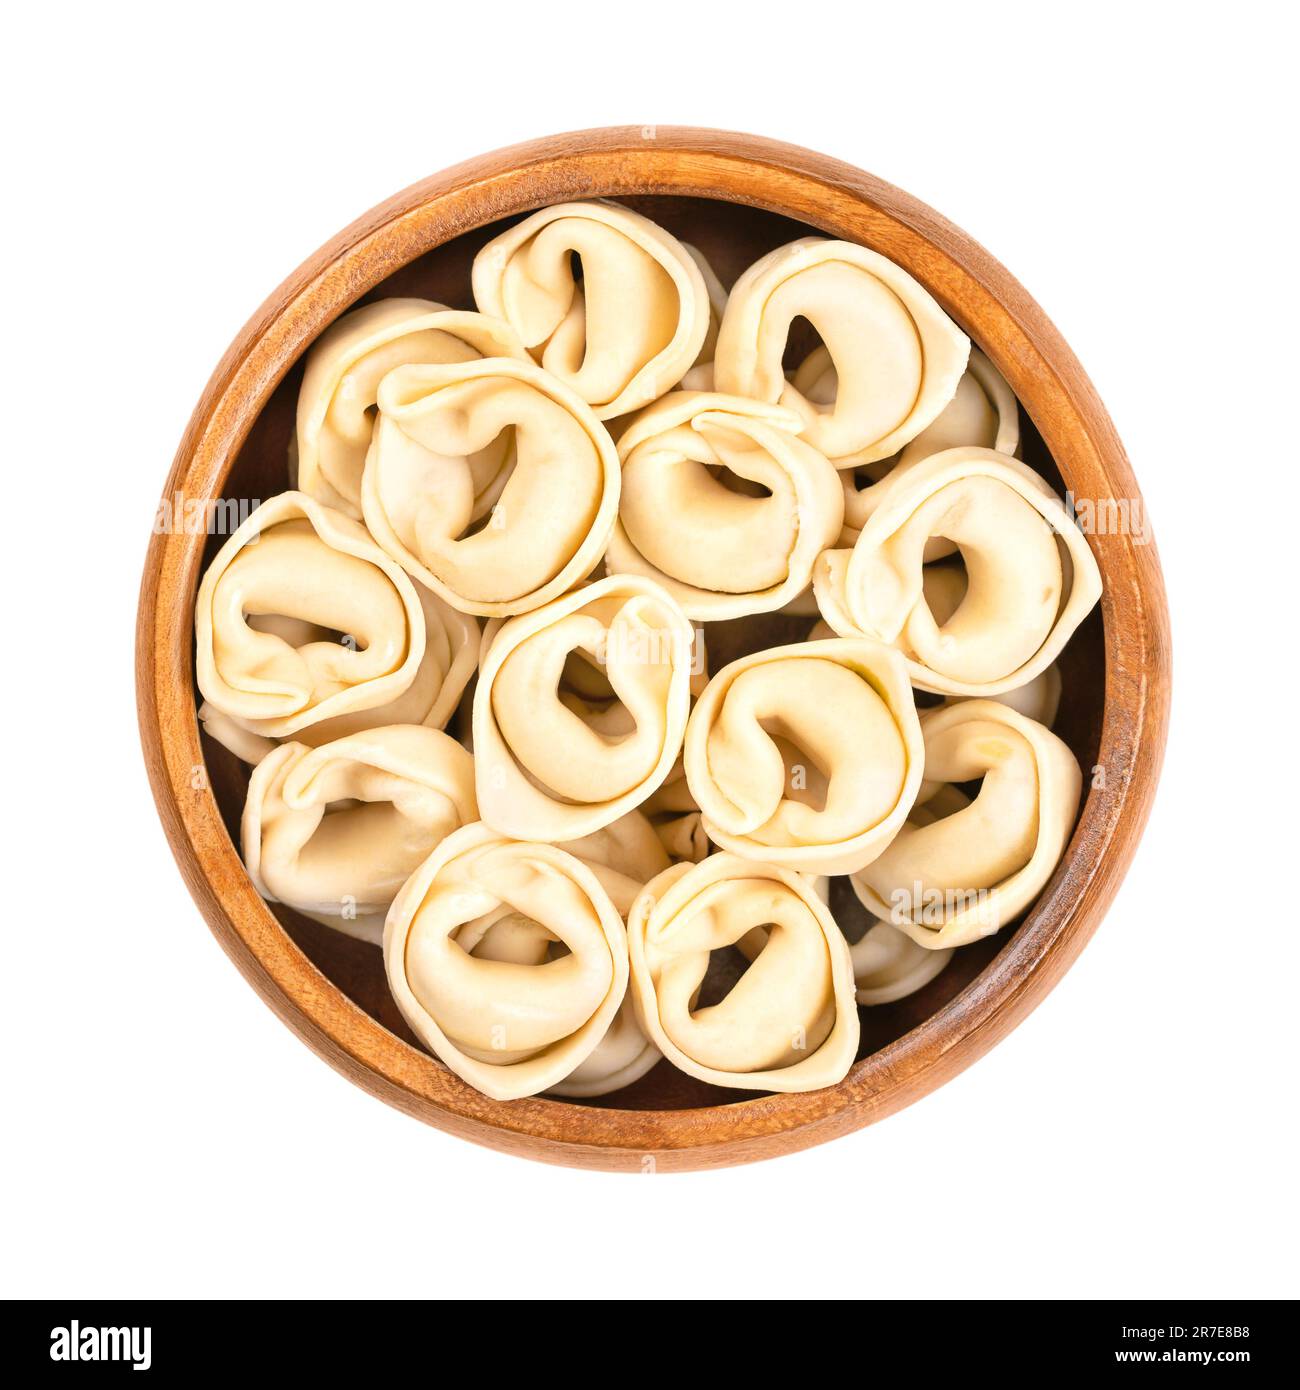 Uncooked, dried tortellini, in a wooden bowl. Industrially made stuffed dumplings, Italian pasta, with distinctive shape. Stock Photo